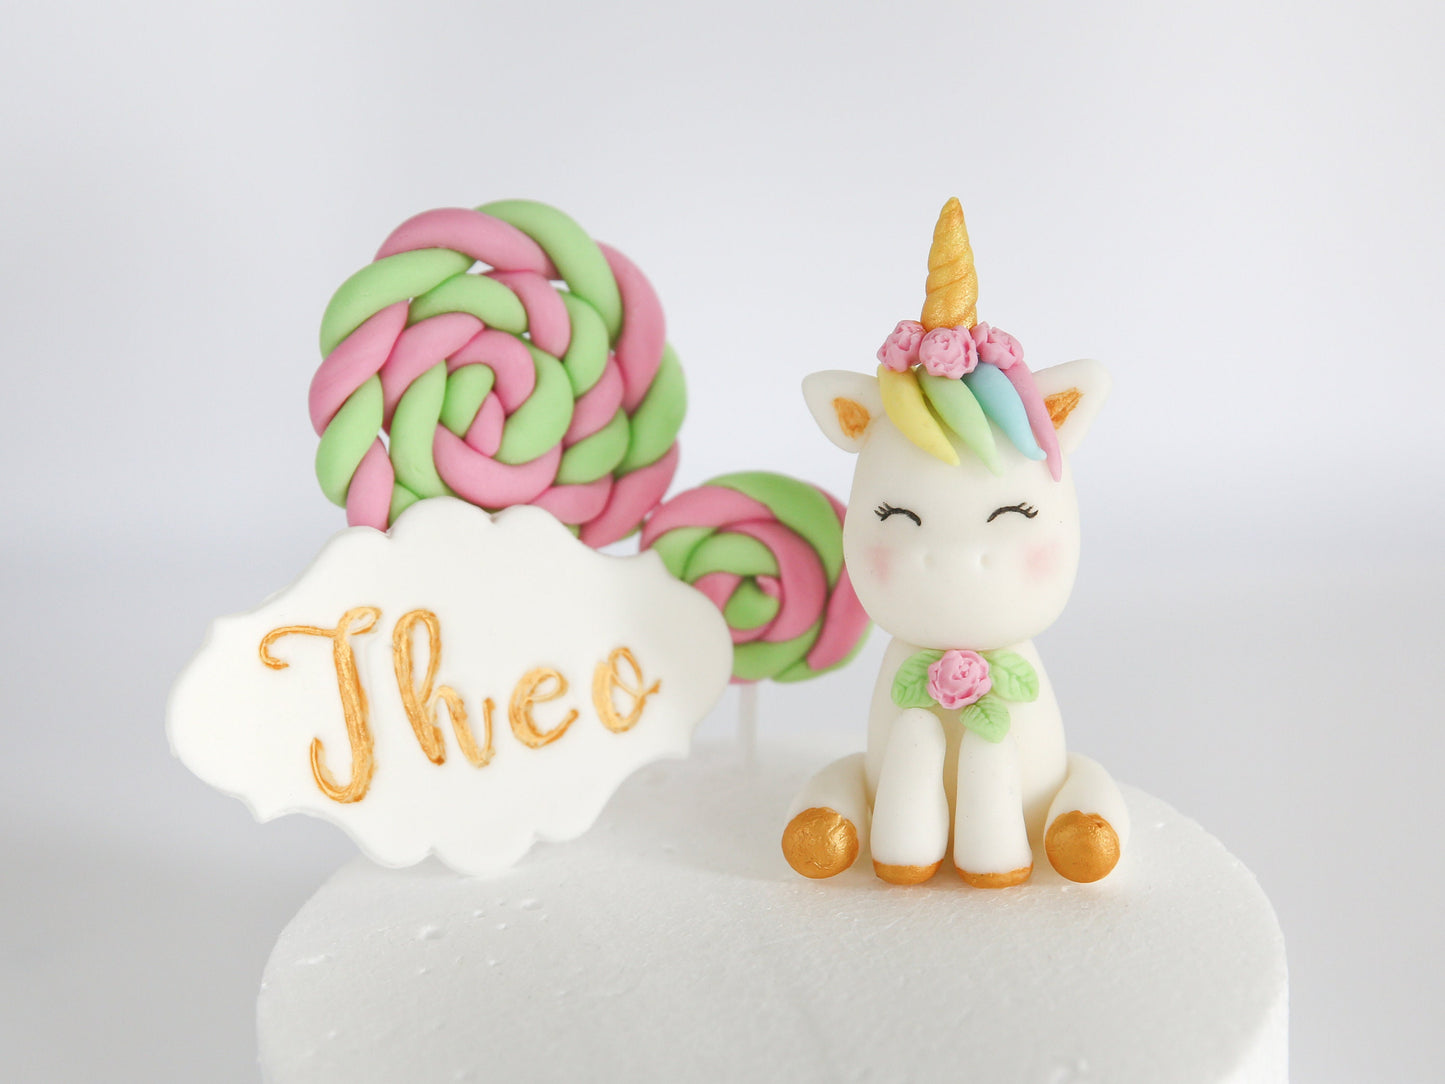 Cute Baby Unicorn Cake Topper Fondant in Cloud Bed and Smiling Unicorn with Lollipops and Name Tag